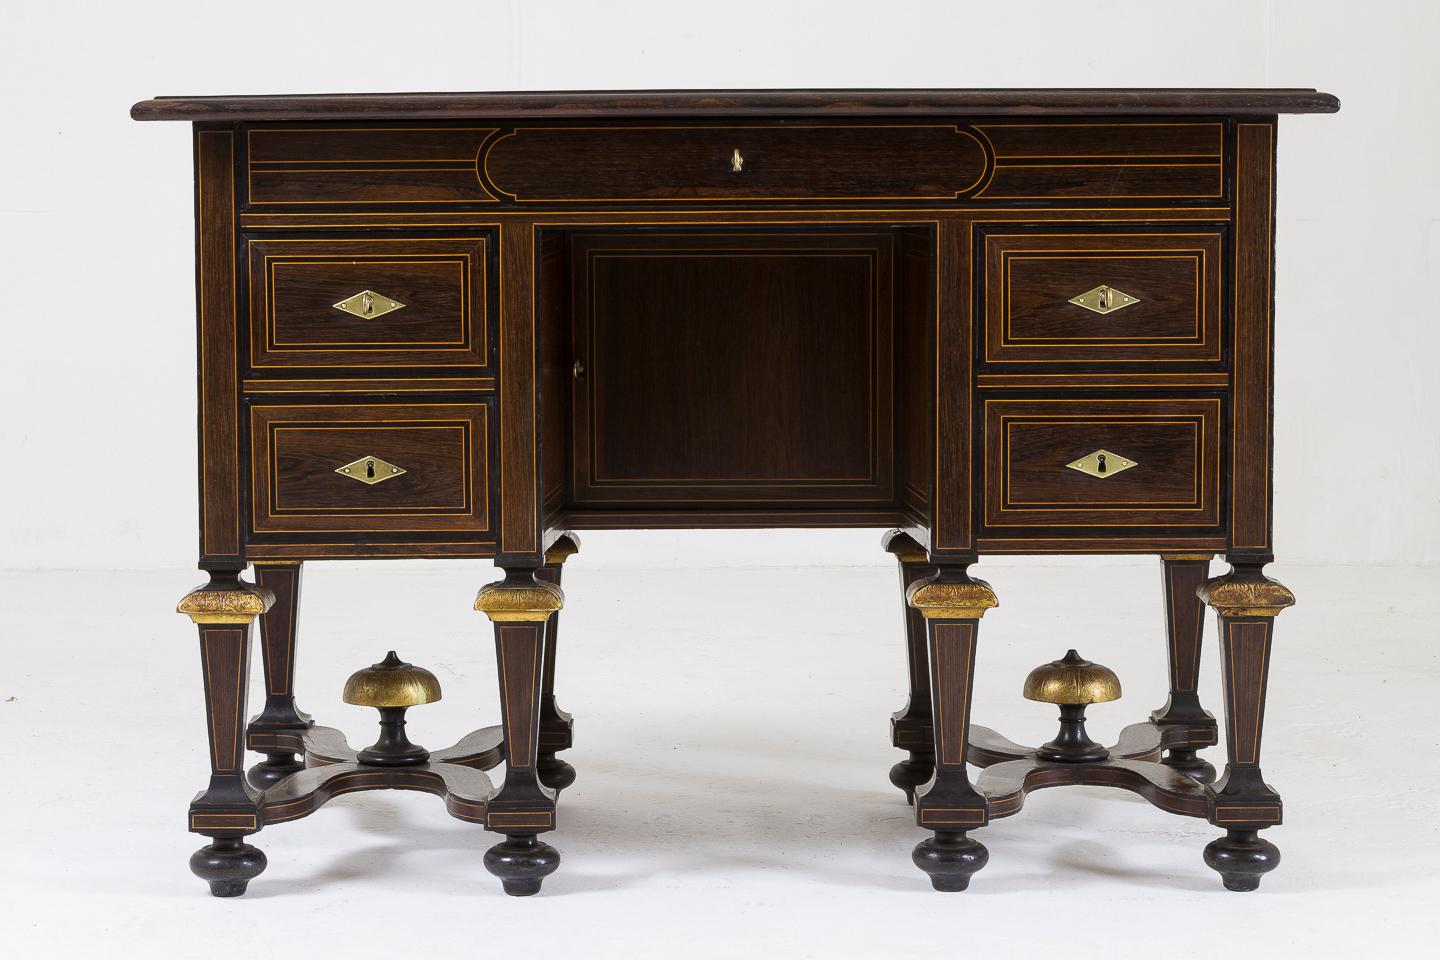 Exceptional quality 19th century French rosewood desk in the Mazarine style, with gilded finials.